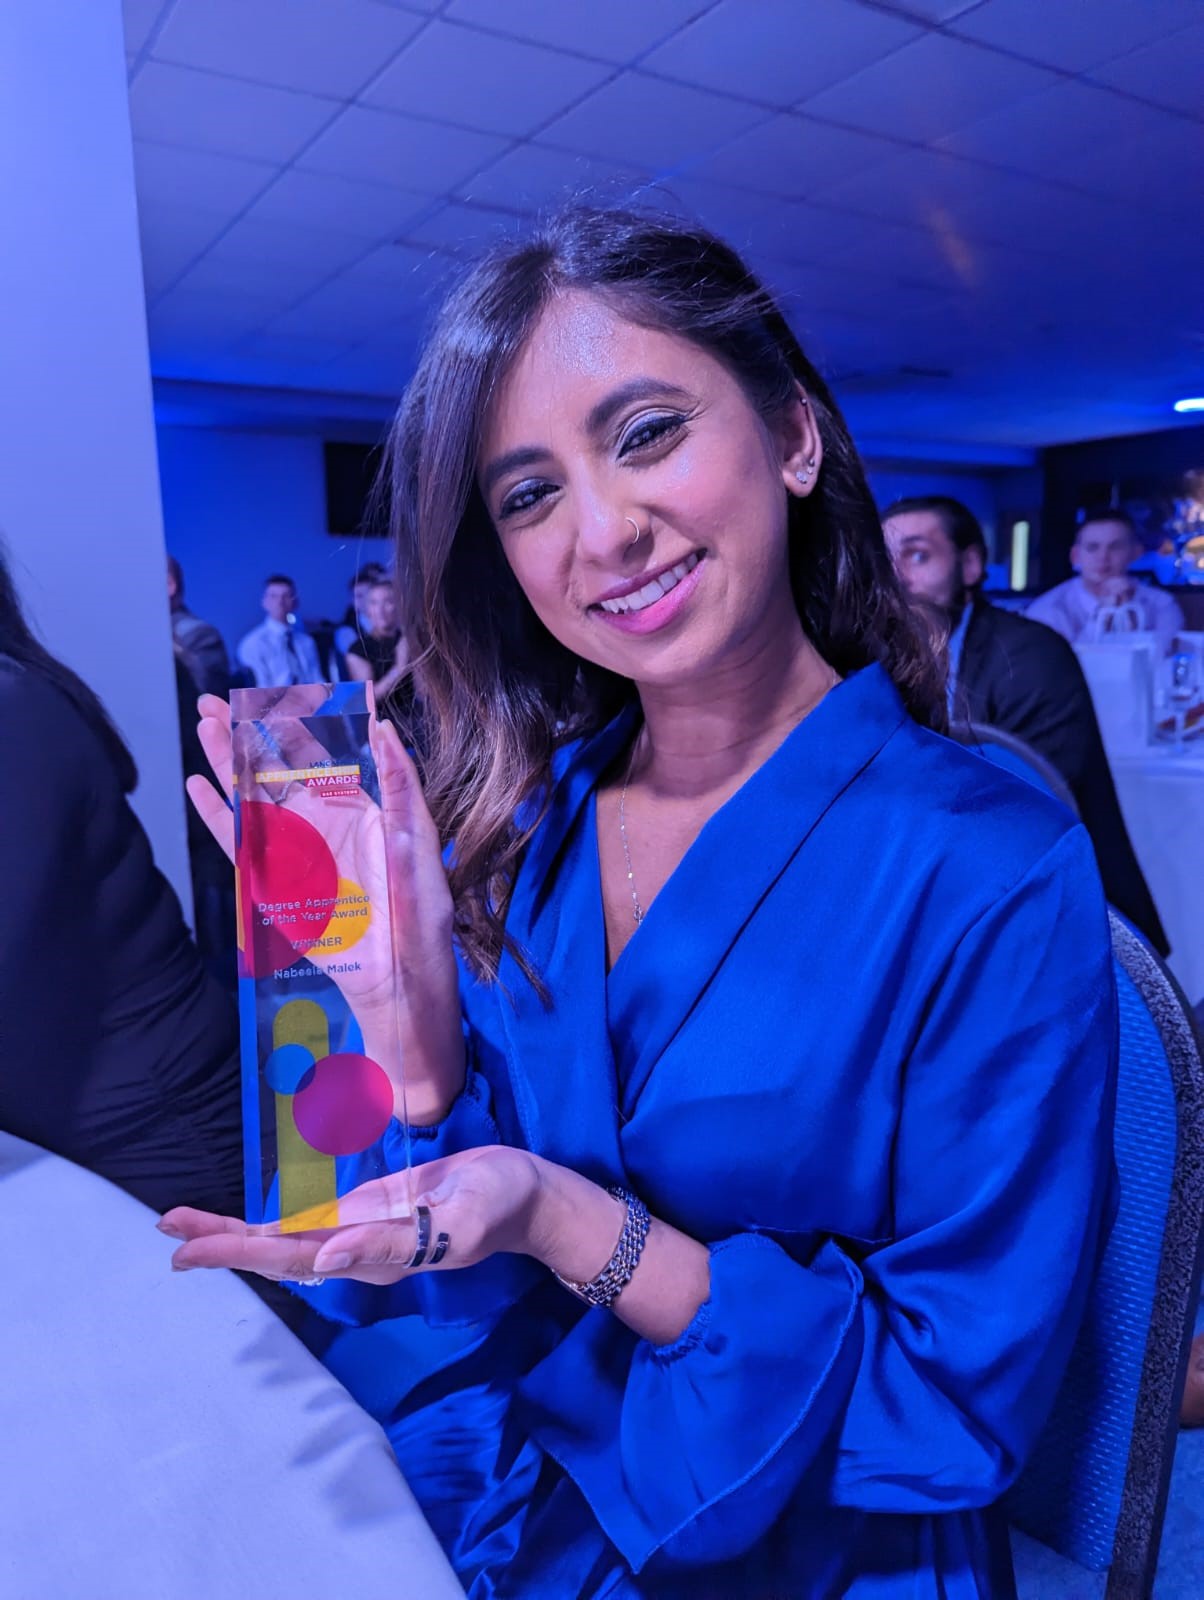 Nabeela is named as Lancashire Degree Apprentice of the Year!